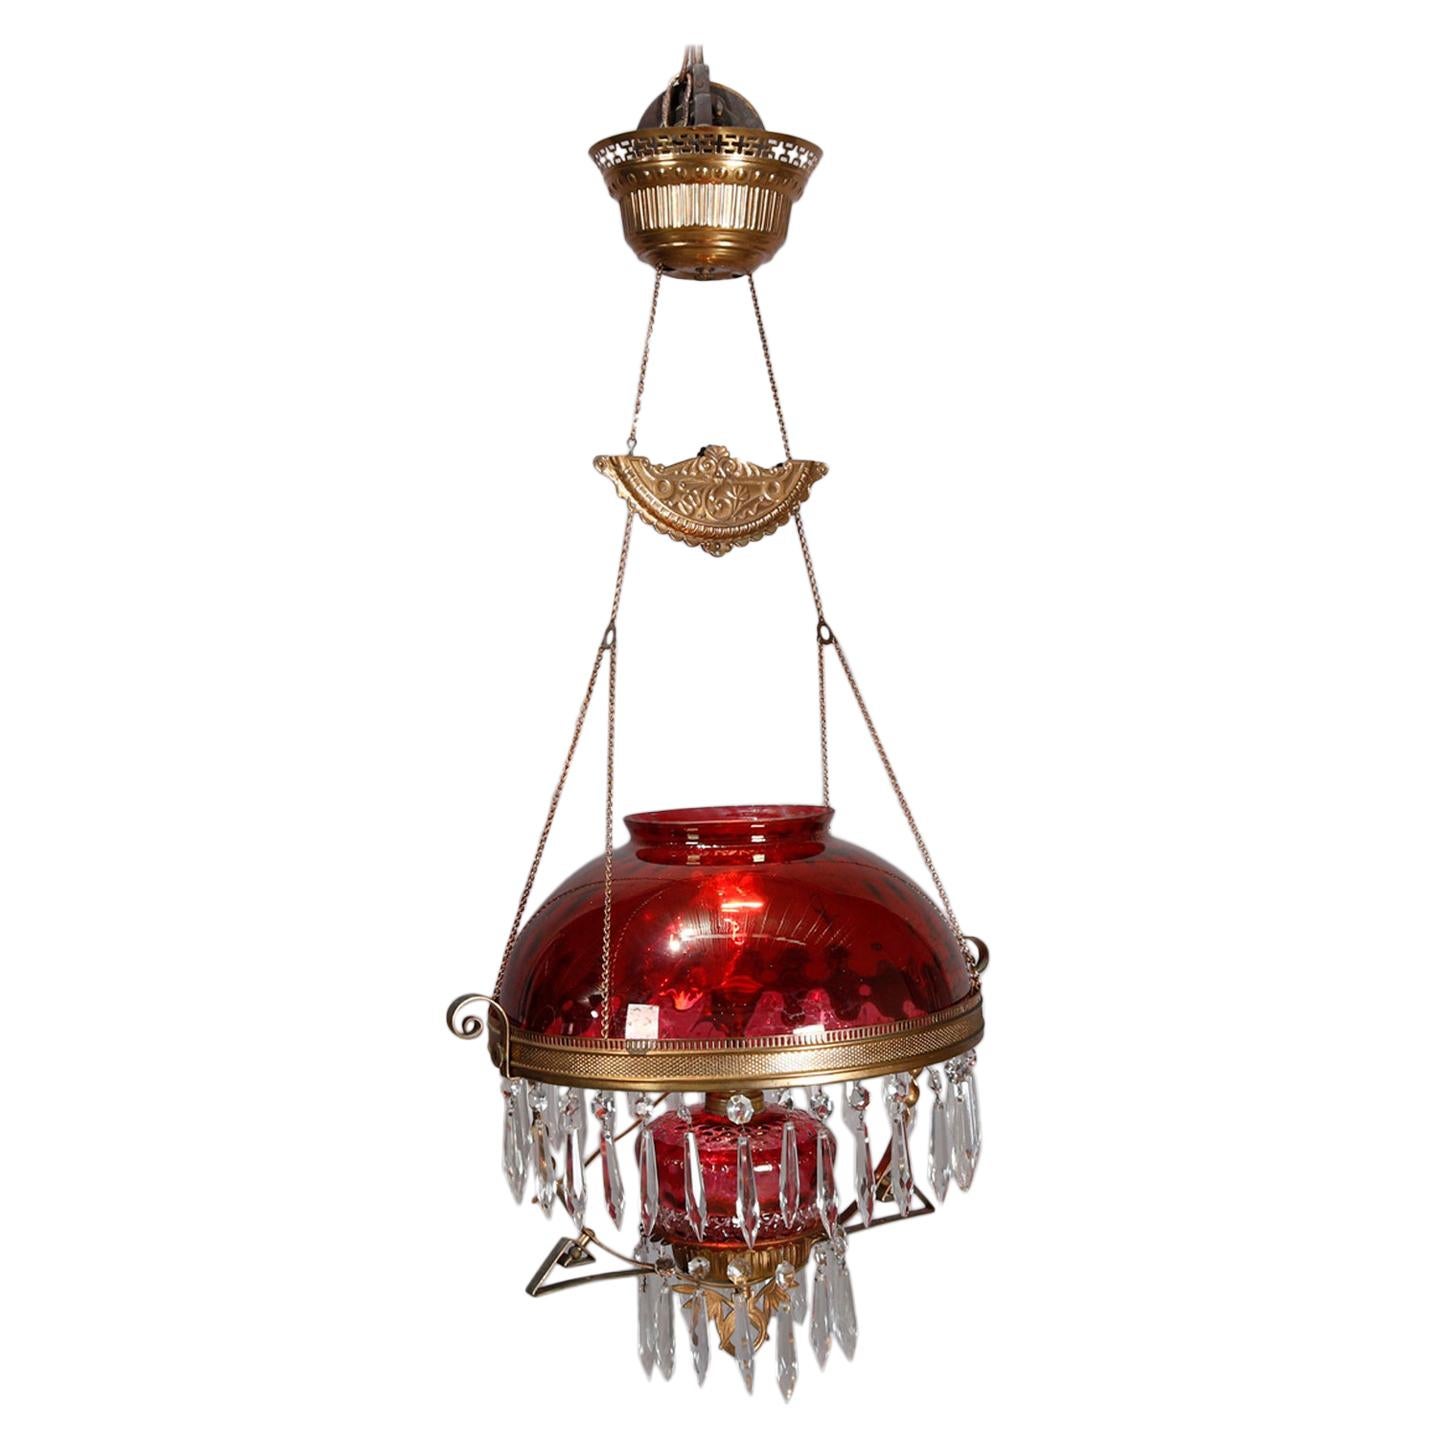 Victorian Electric Cranberry Glass, Brass and Crystal Banquet Light, circa 1890